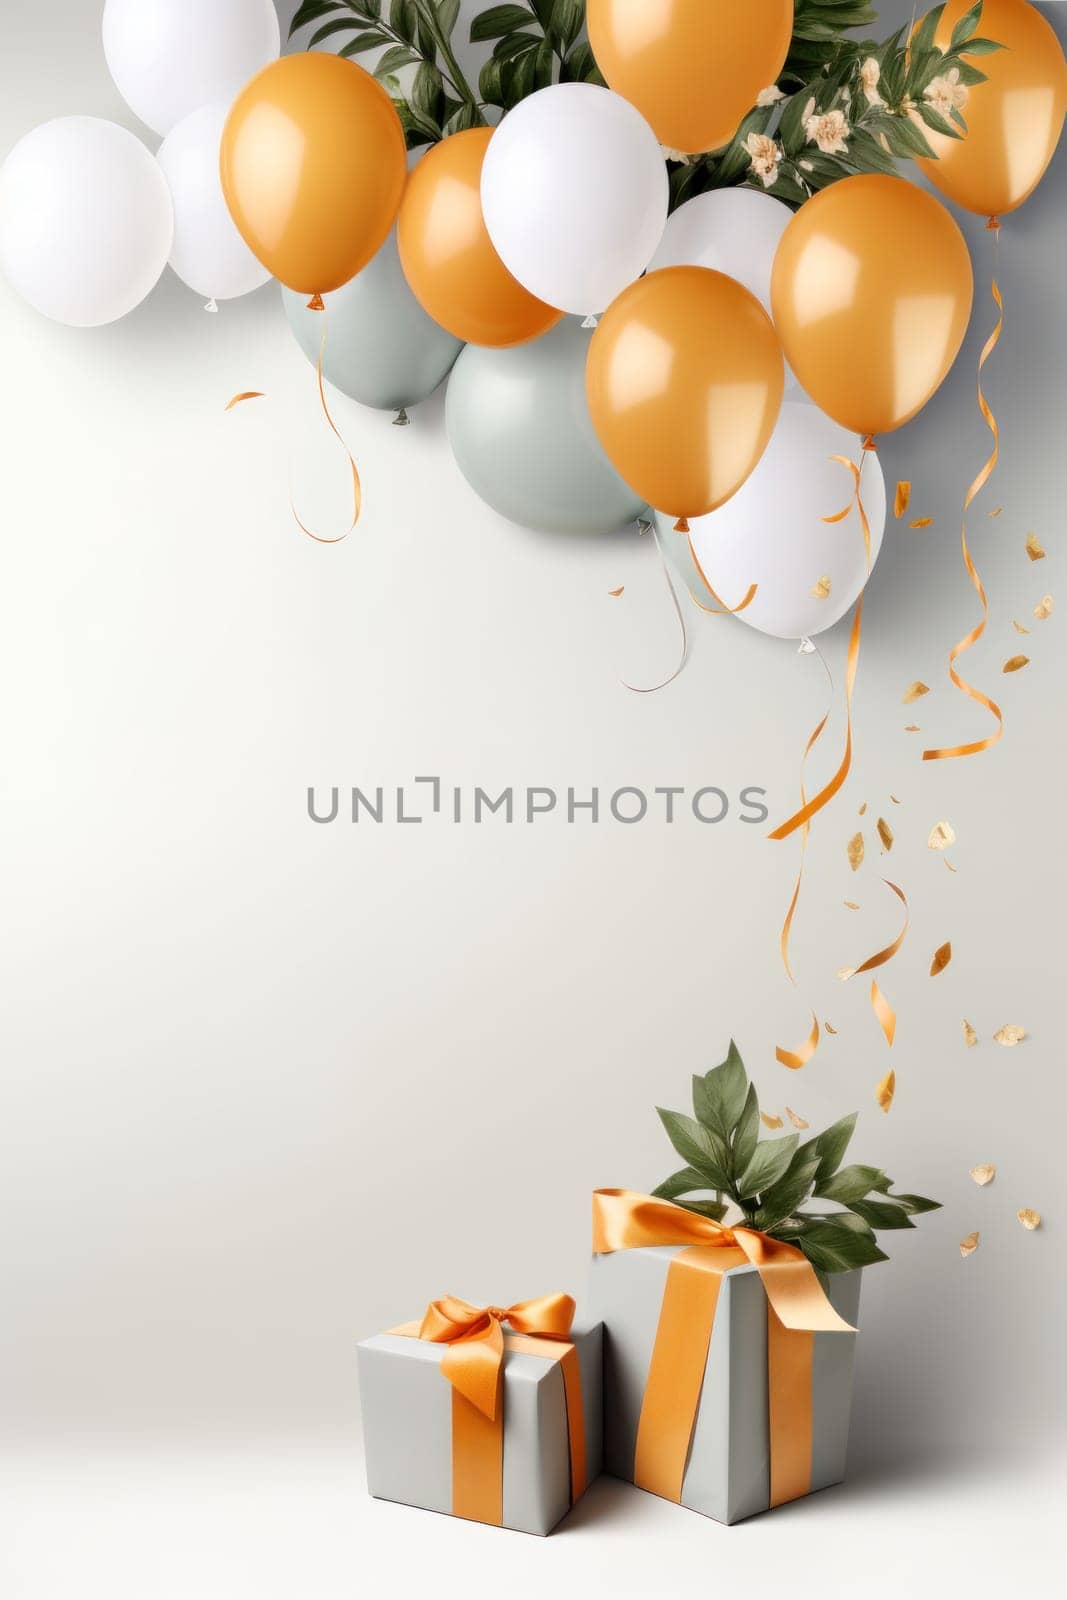 A bunch of white and orange balloons and gift boxes